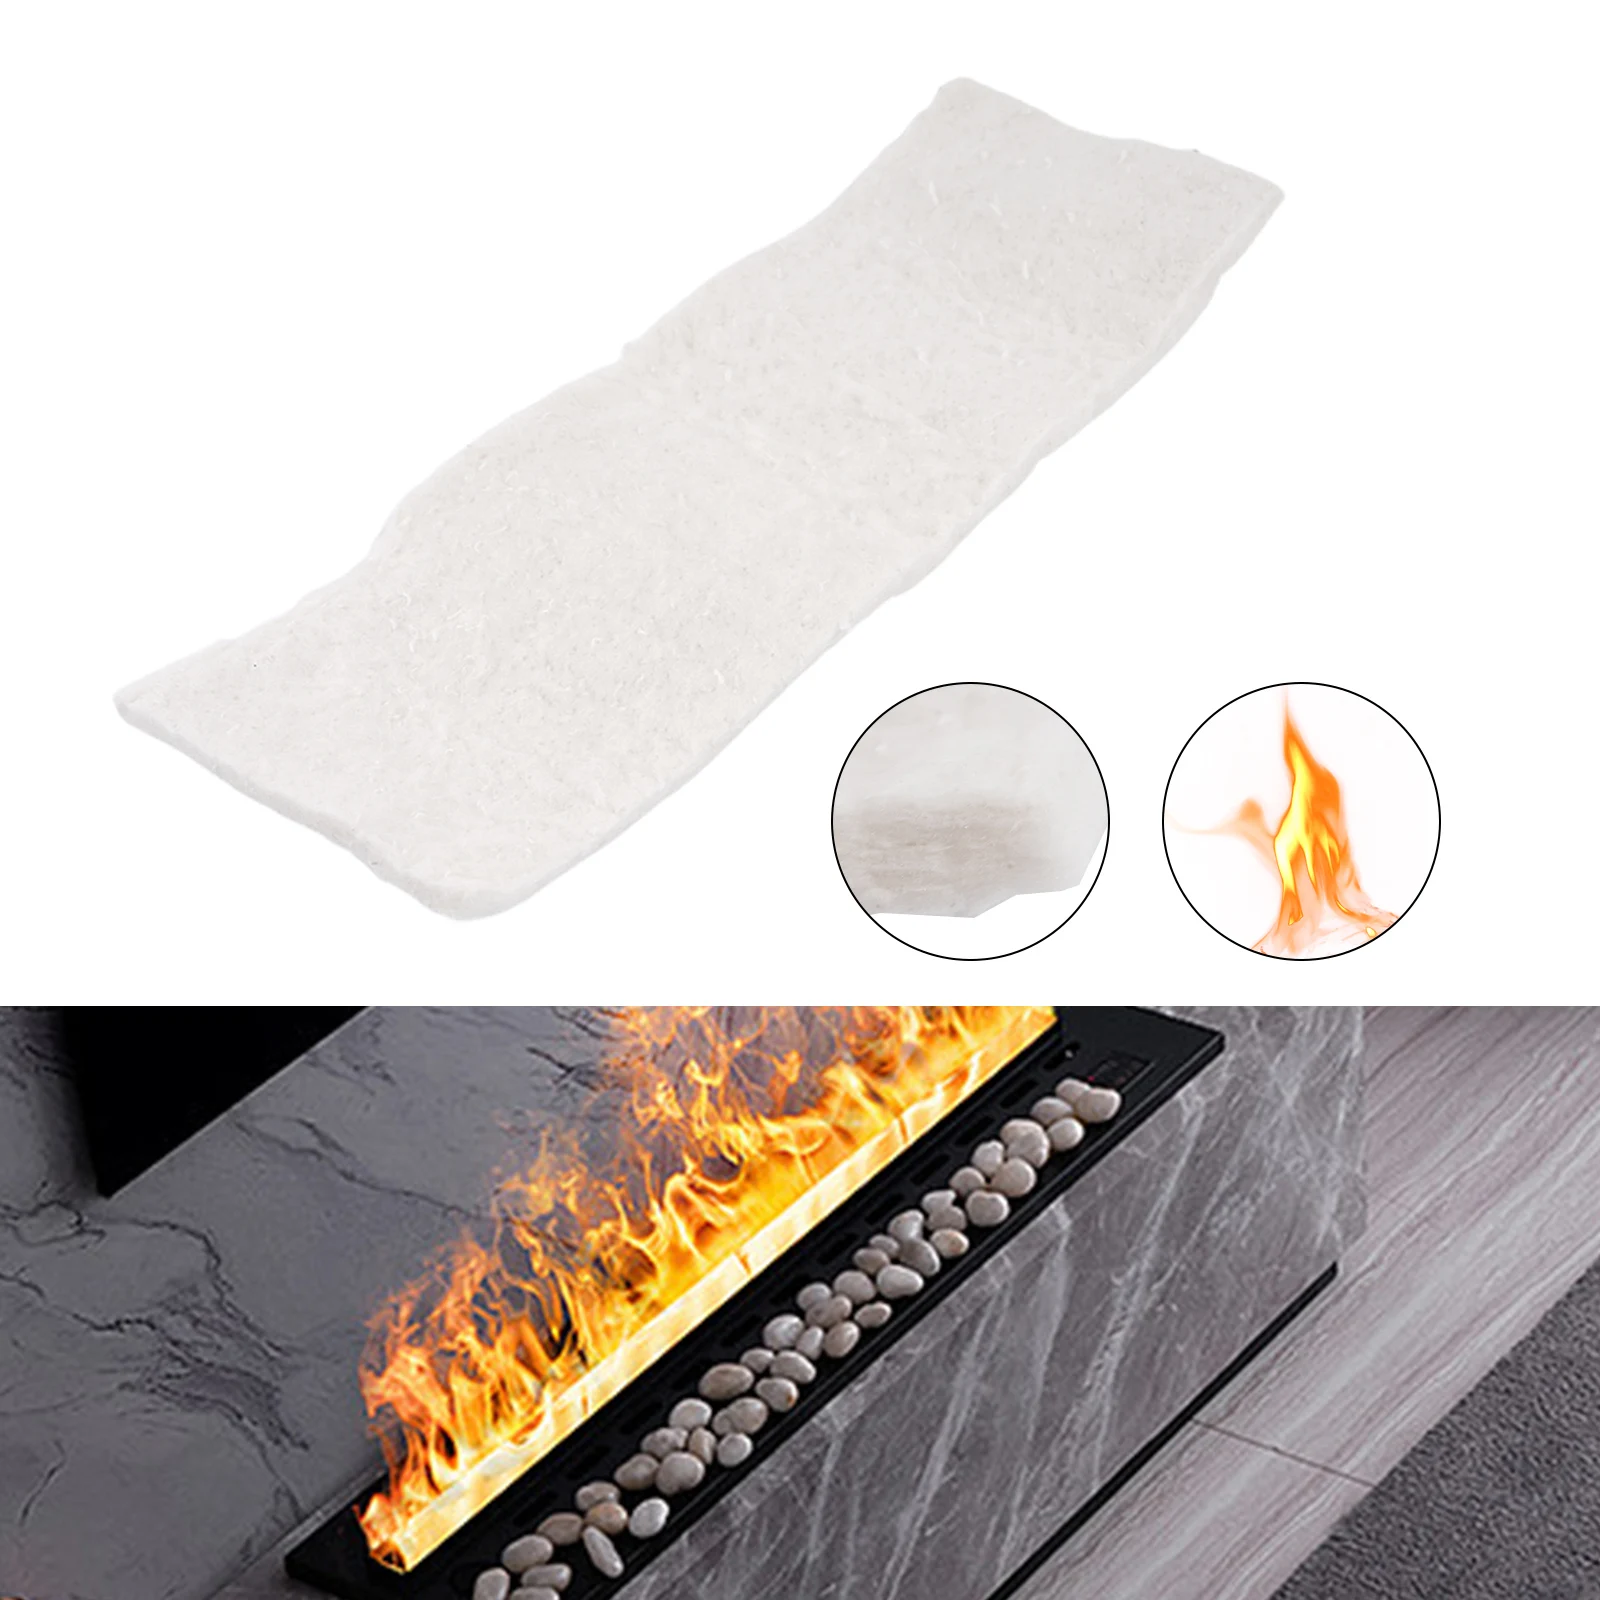 

High Quality Practical Replaceable Brand New Blanket 1206 ℃ 1Pcs CMS Bio-fibres Environmentally Increases Safety